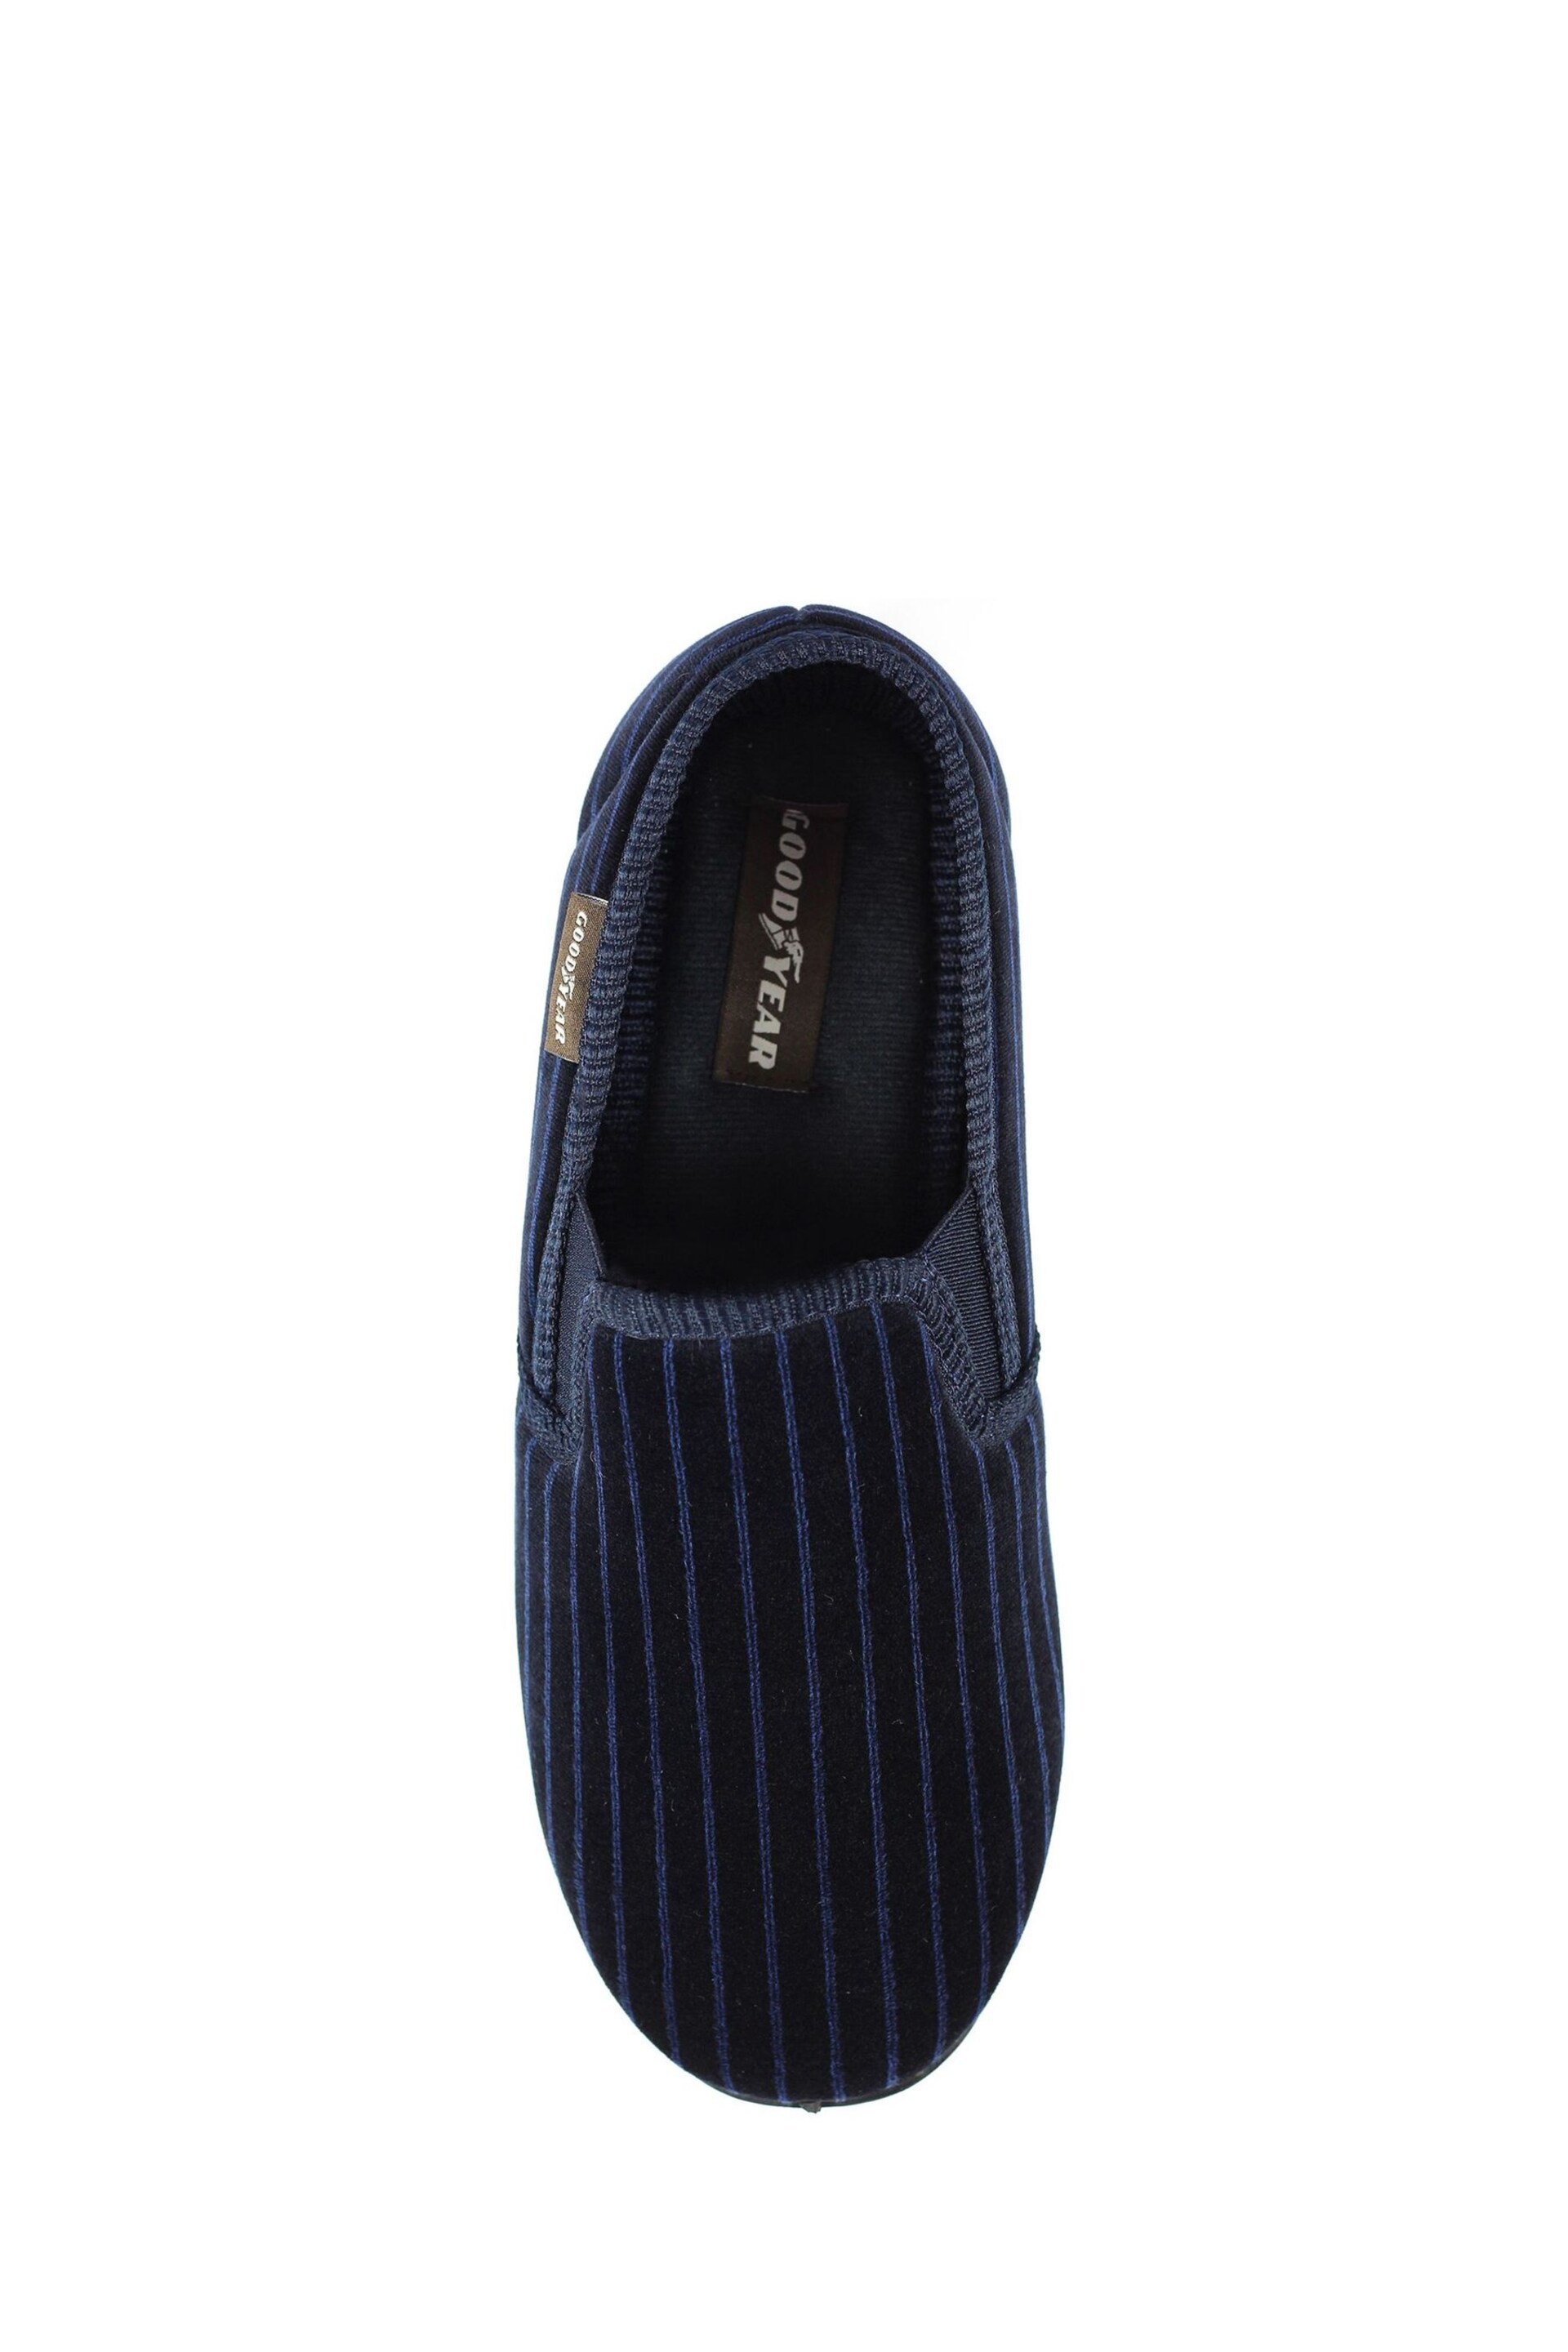 Goodyear Blue Don Navy Full Soft Slippers - Image 7 of 9